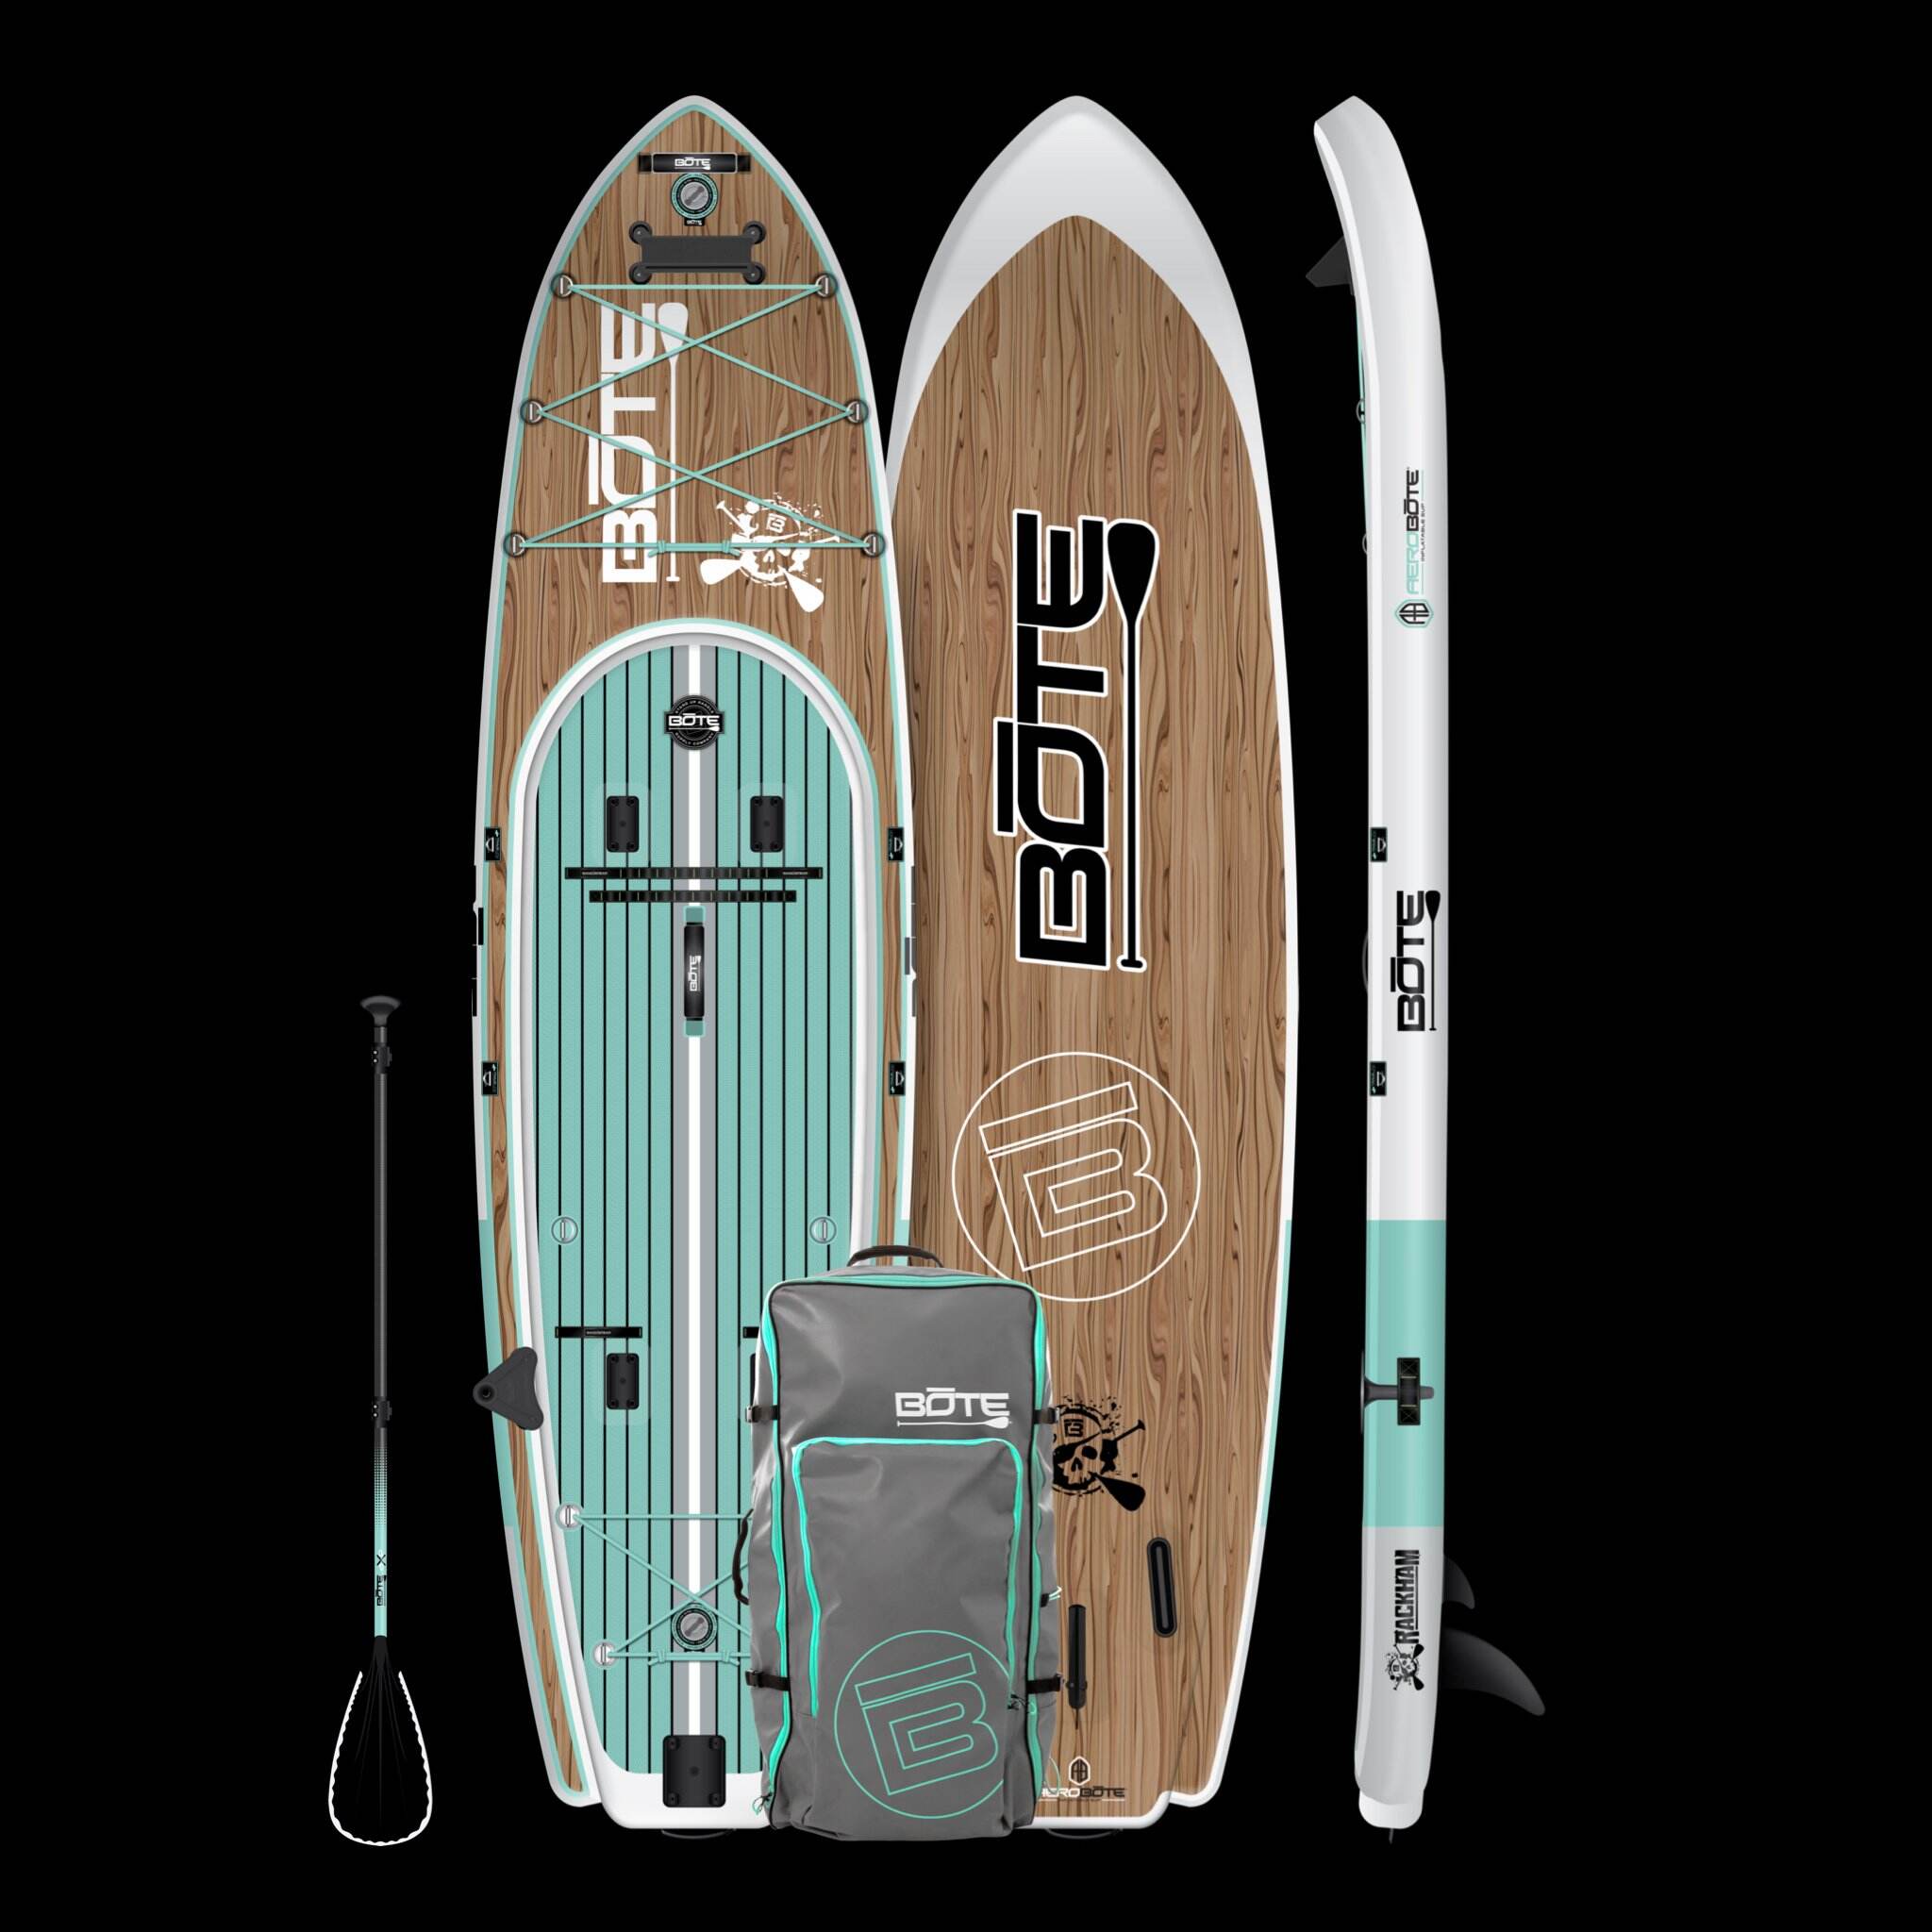 Float for Hours on the Bote Rackham Aero Inflatable Paddle Board